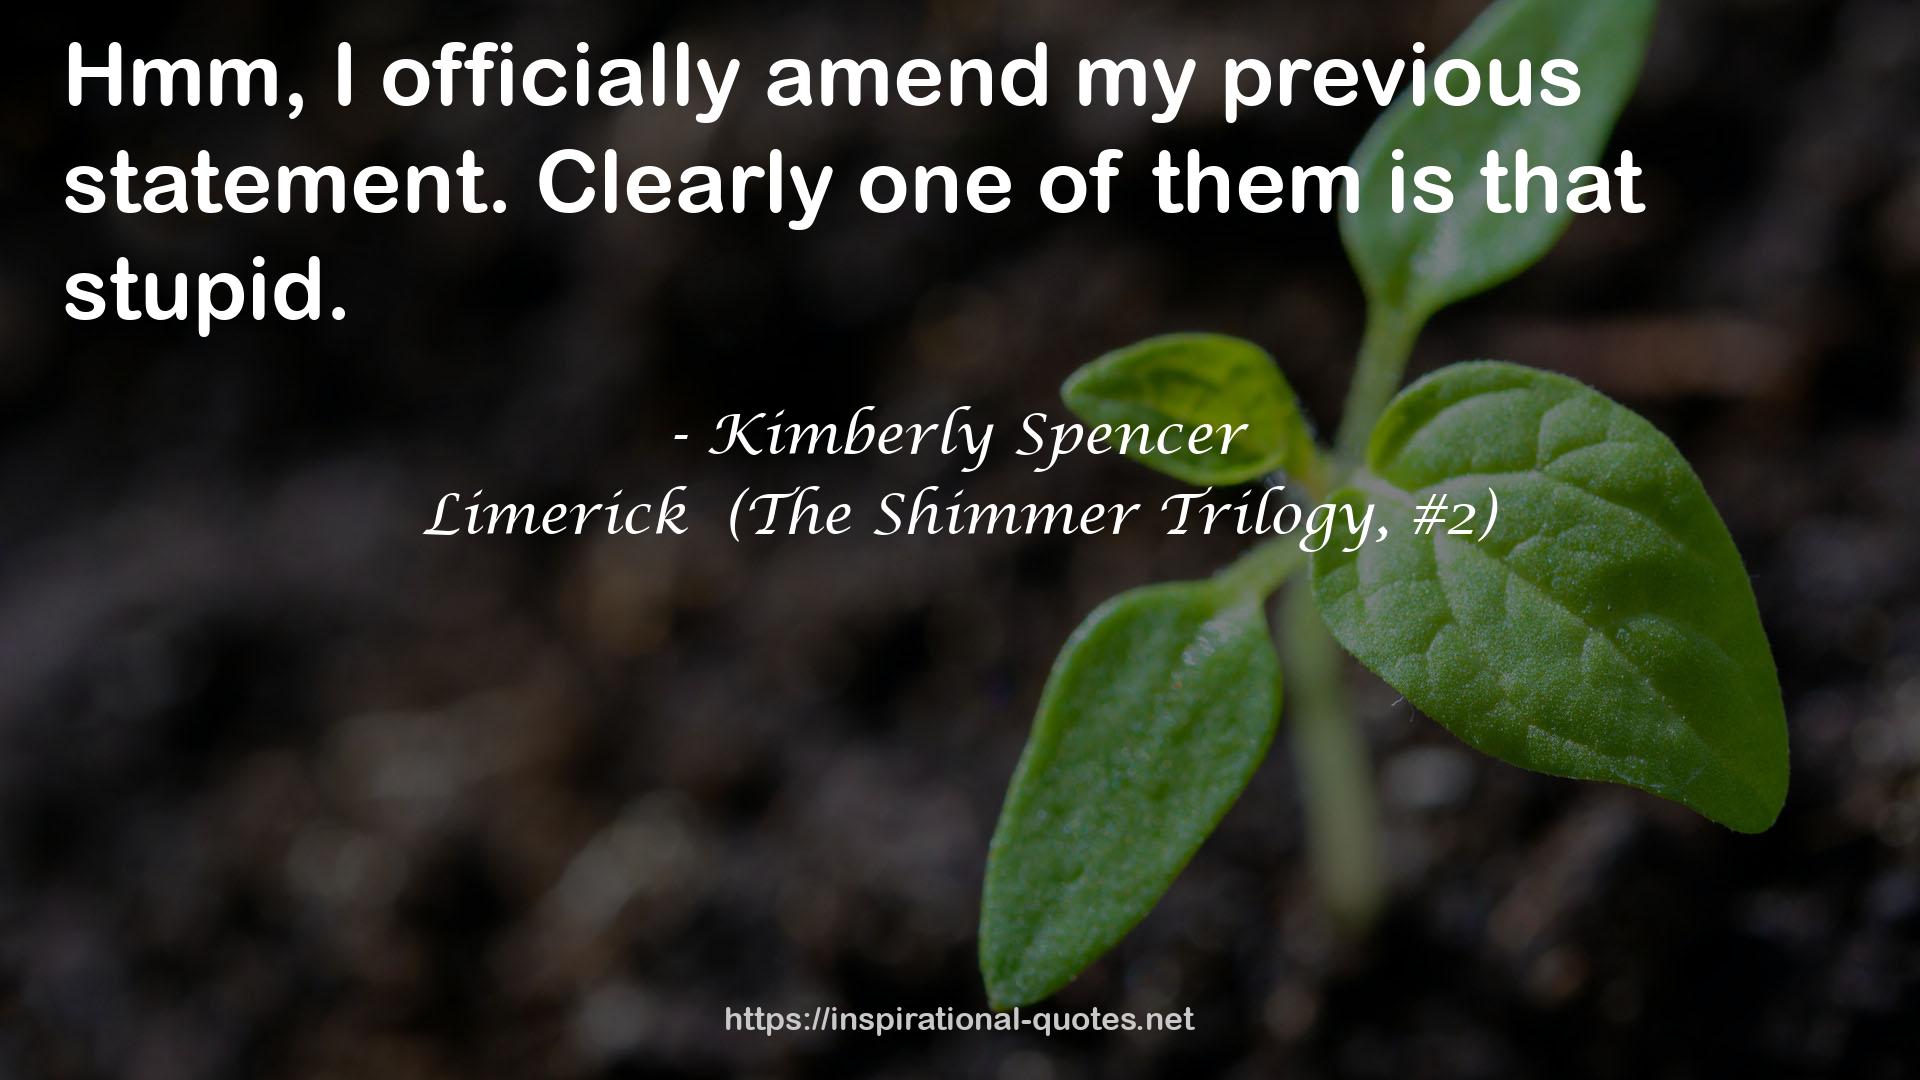 Limerick  (The Shimmer Trilogy, #2) QUOTES